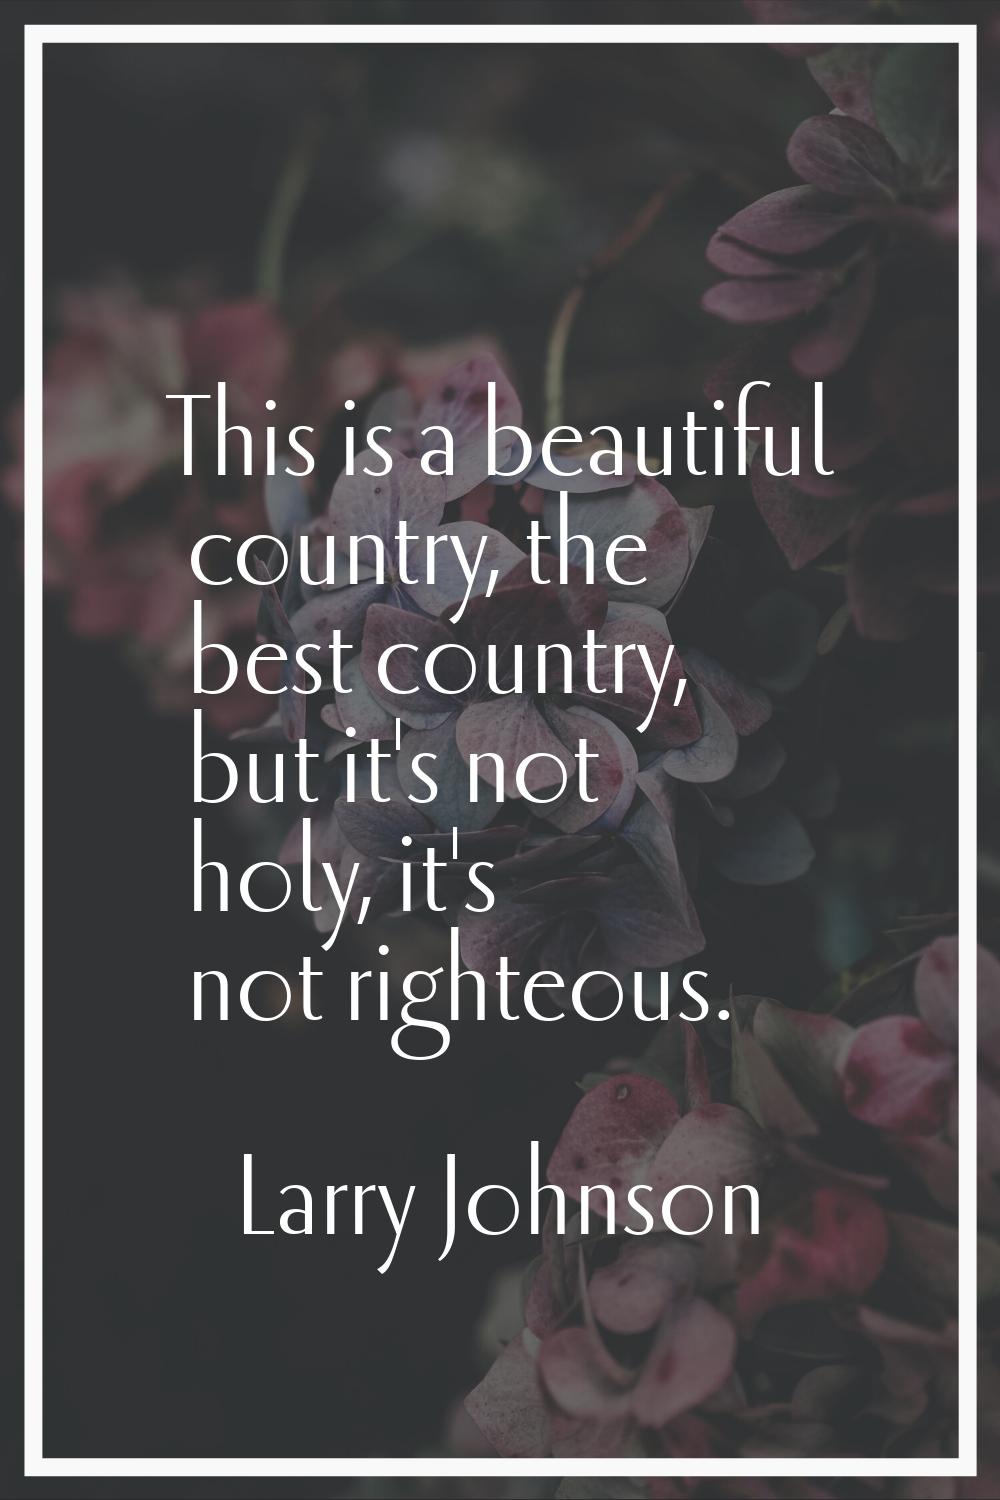 This is a beautiful country, the best country, but it's not holy, it's not righteous.